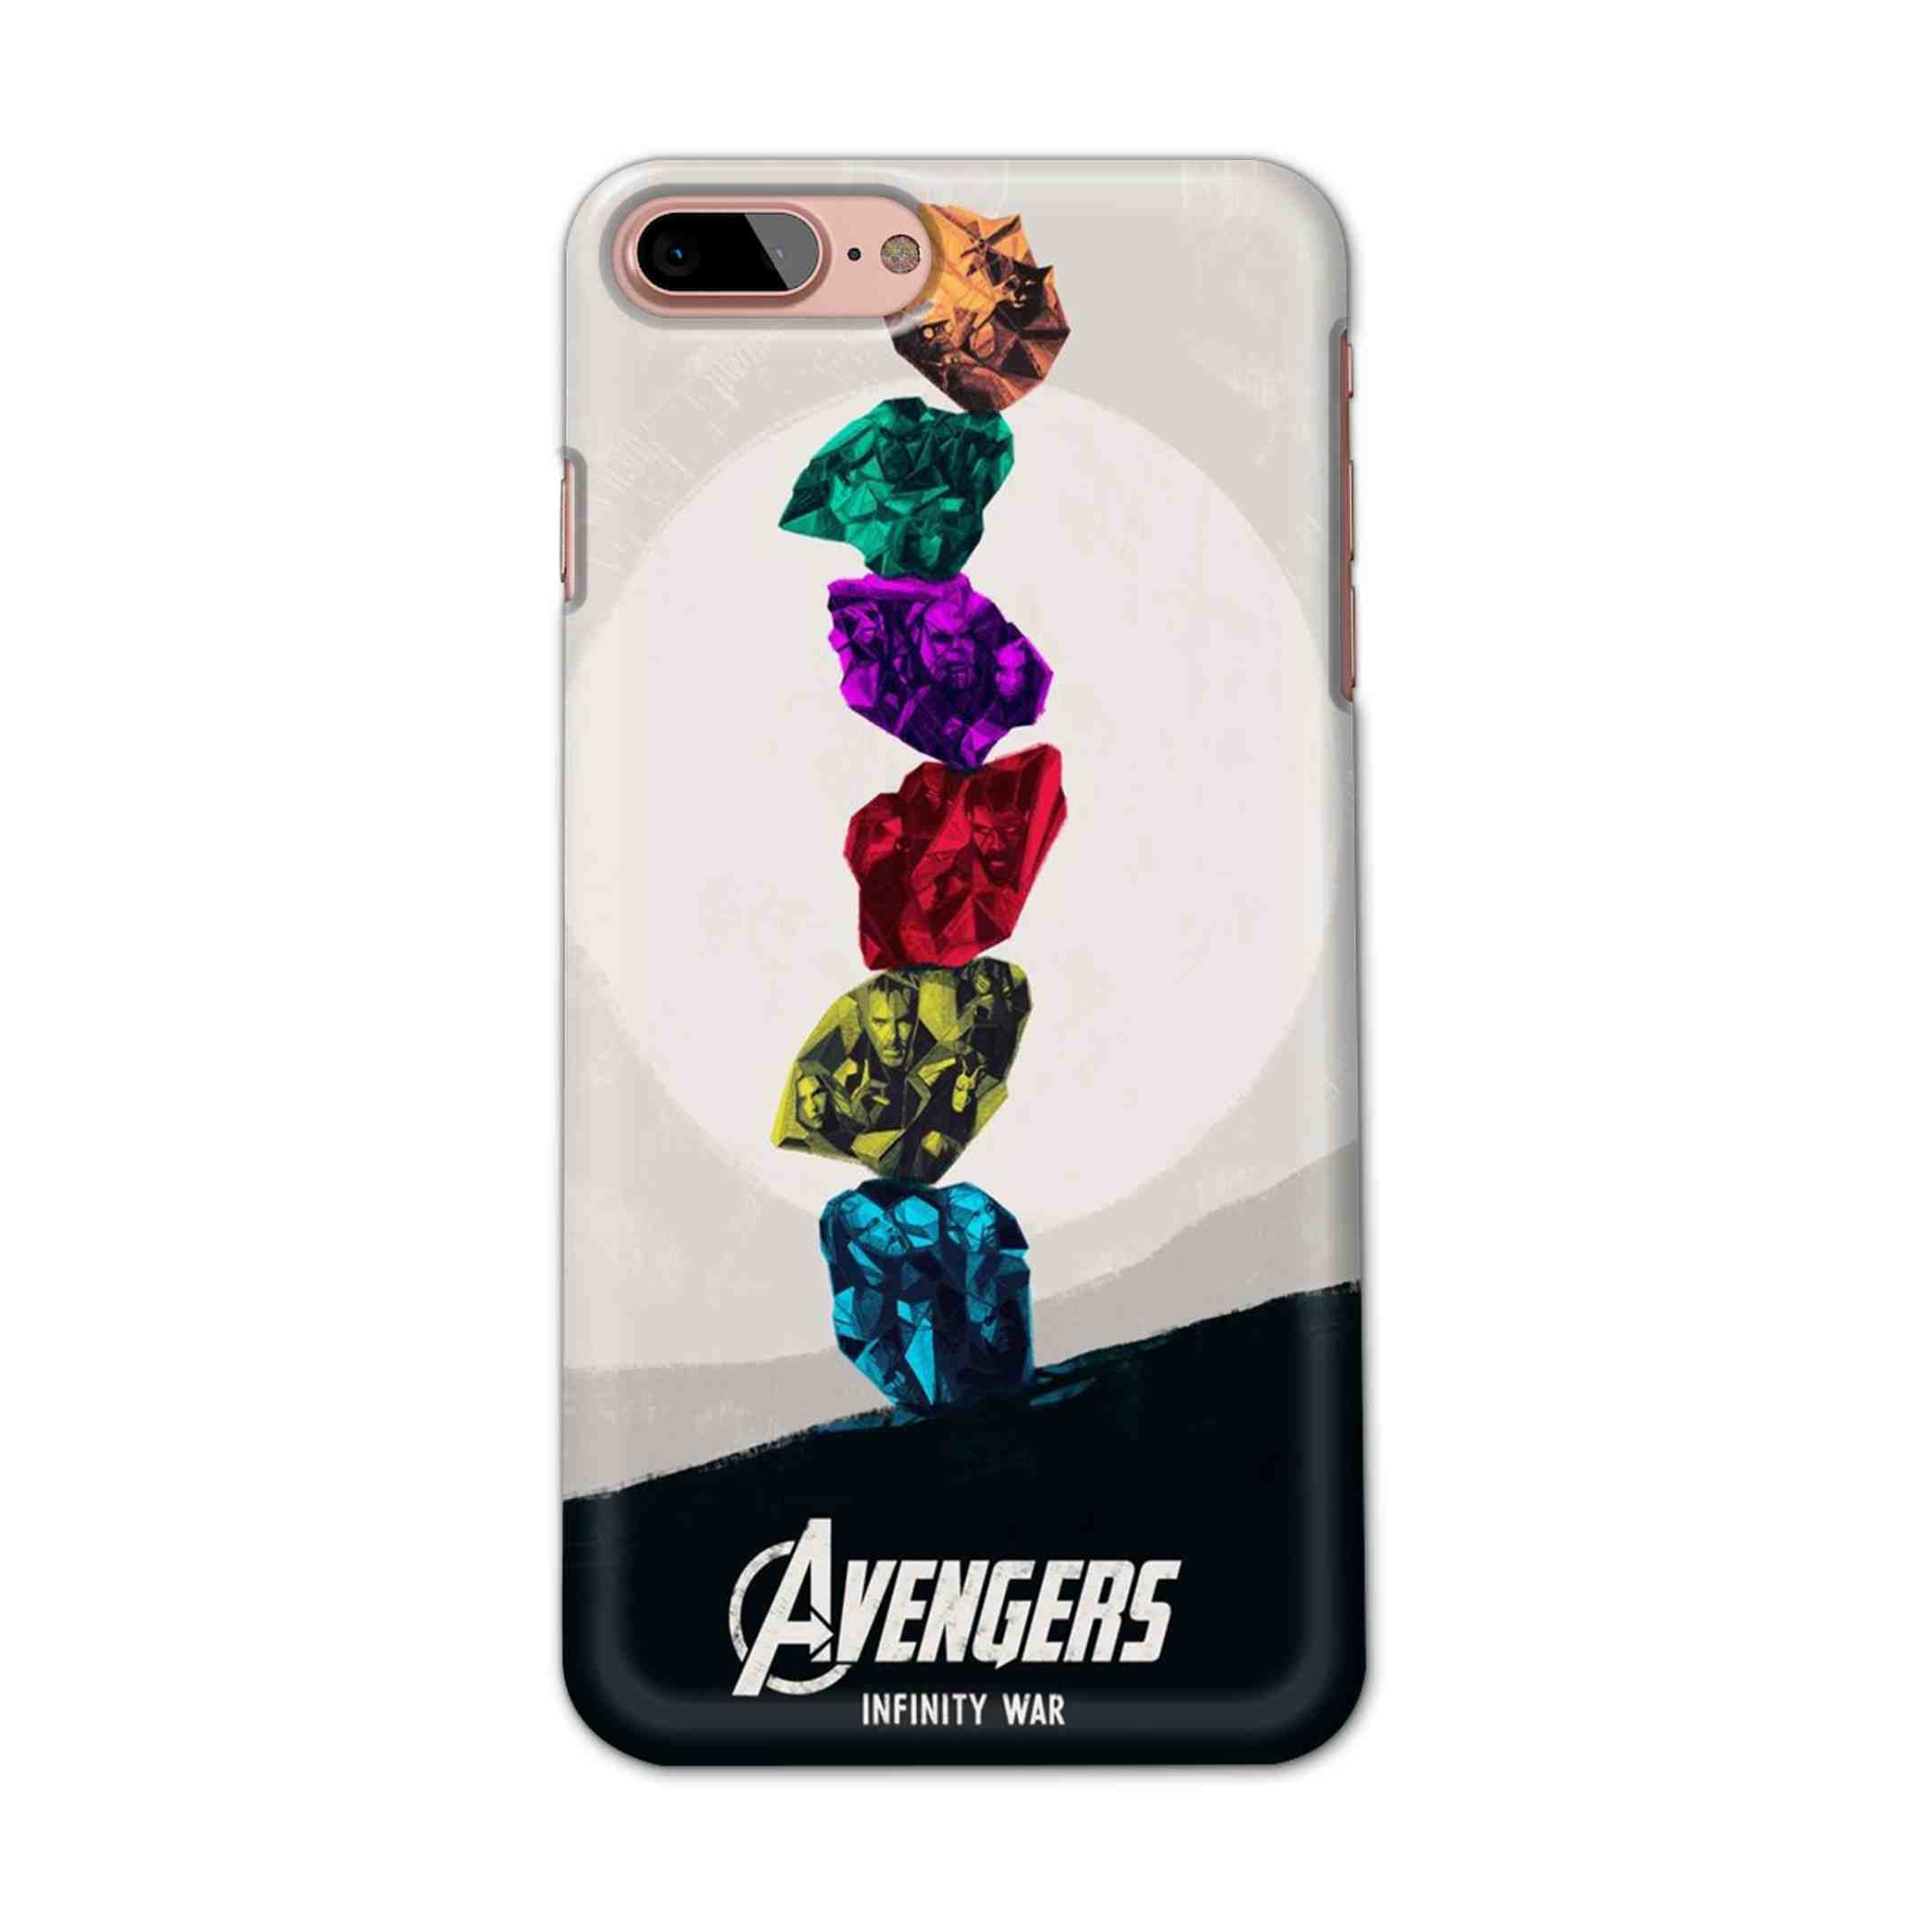 Buy Avengers Stone Hard Back Mobile Phone Case/Cover For iPhone 7 Plus / 8 Plus Online